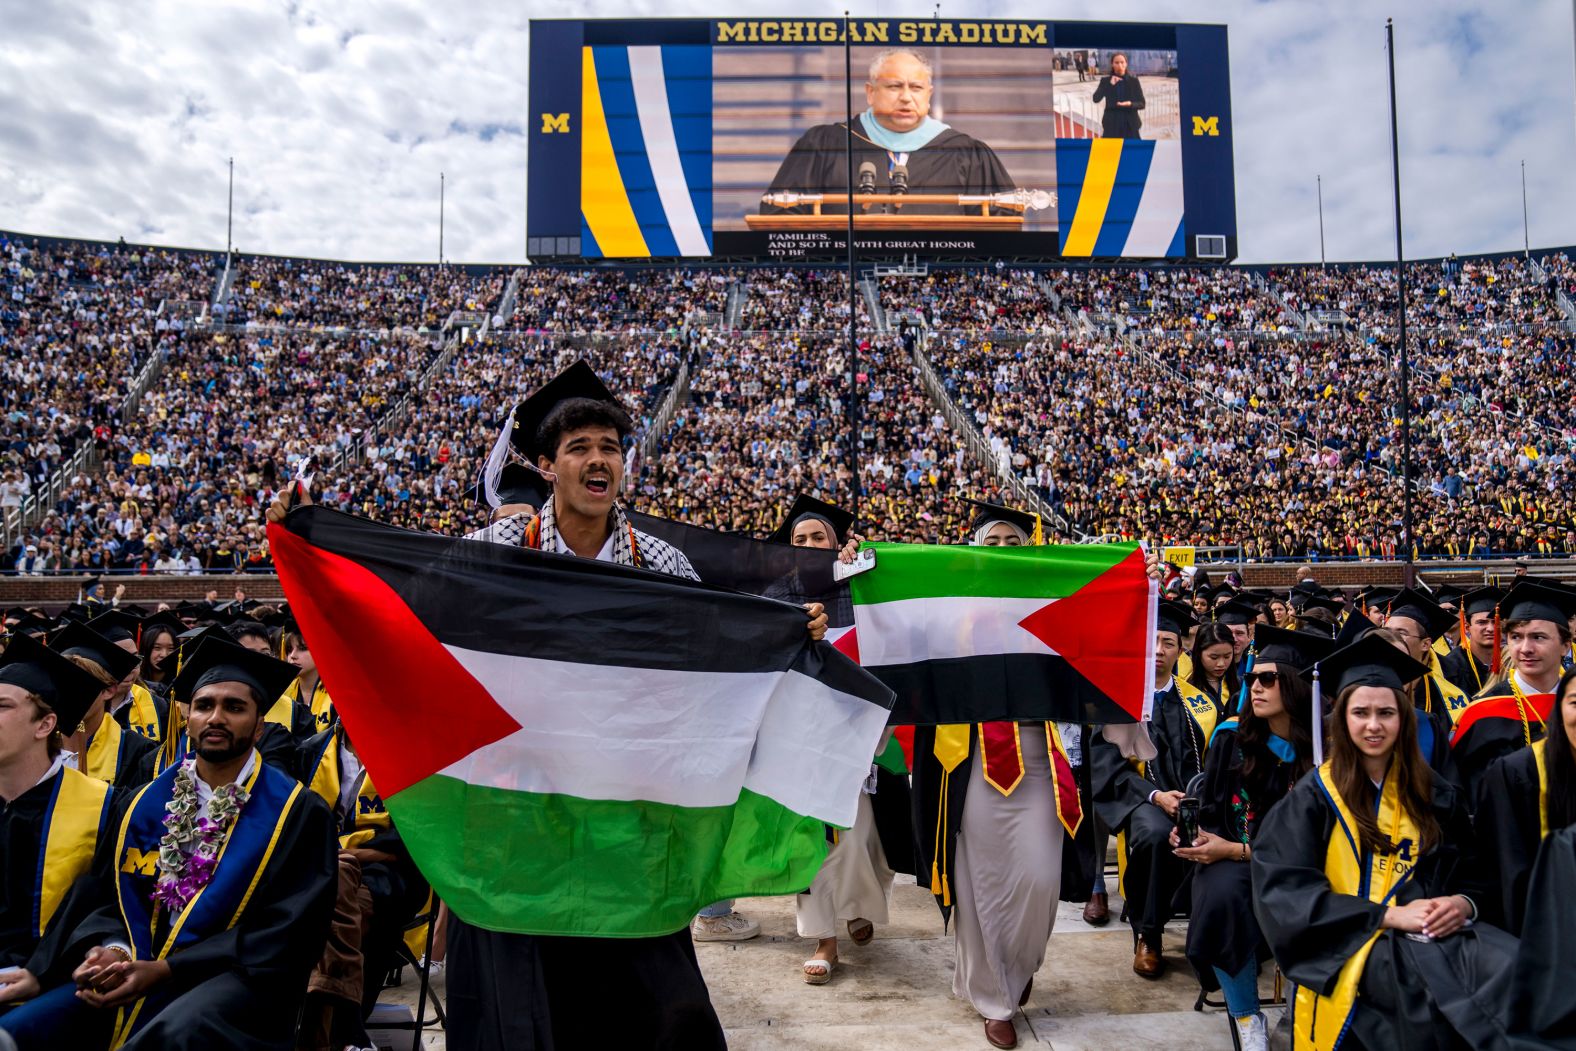 Students hold Palestinian flags during the University of Michigan's spring commencement ceremony on Saturday, May 4. <a href="index.php?page=&url=https%3A%2F%2Fwww.cnn.com%2Fbusiness%2Flive-news%2Funiversity-protests-pro-palestinian-israel-05-04-24%2Fh_e15281e5ca173beaf1a710dd5d220a88" target="_blank">Protesters were removed from the ceremony</a> after briefly interrupting the proceedings.